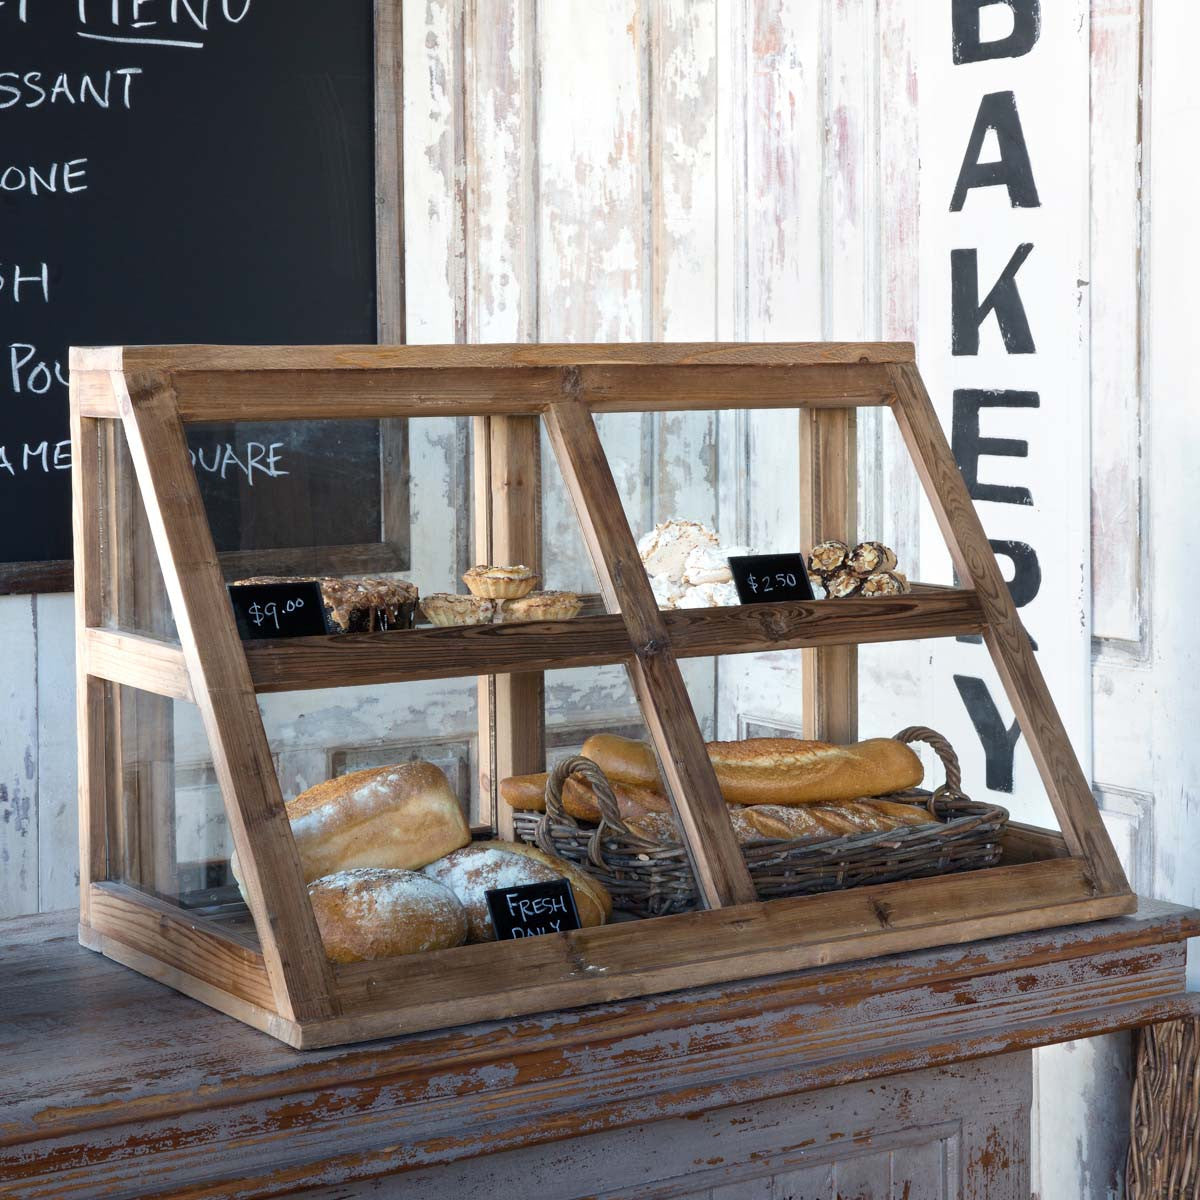 Found this pic of an antique Bakers Rack. I want this one so bad